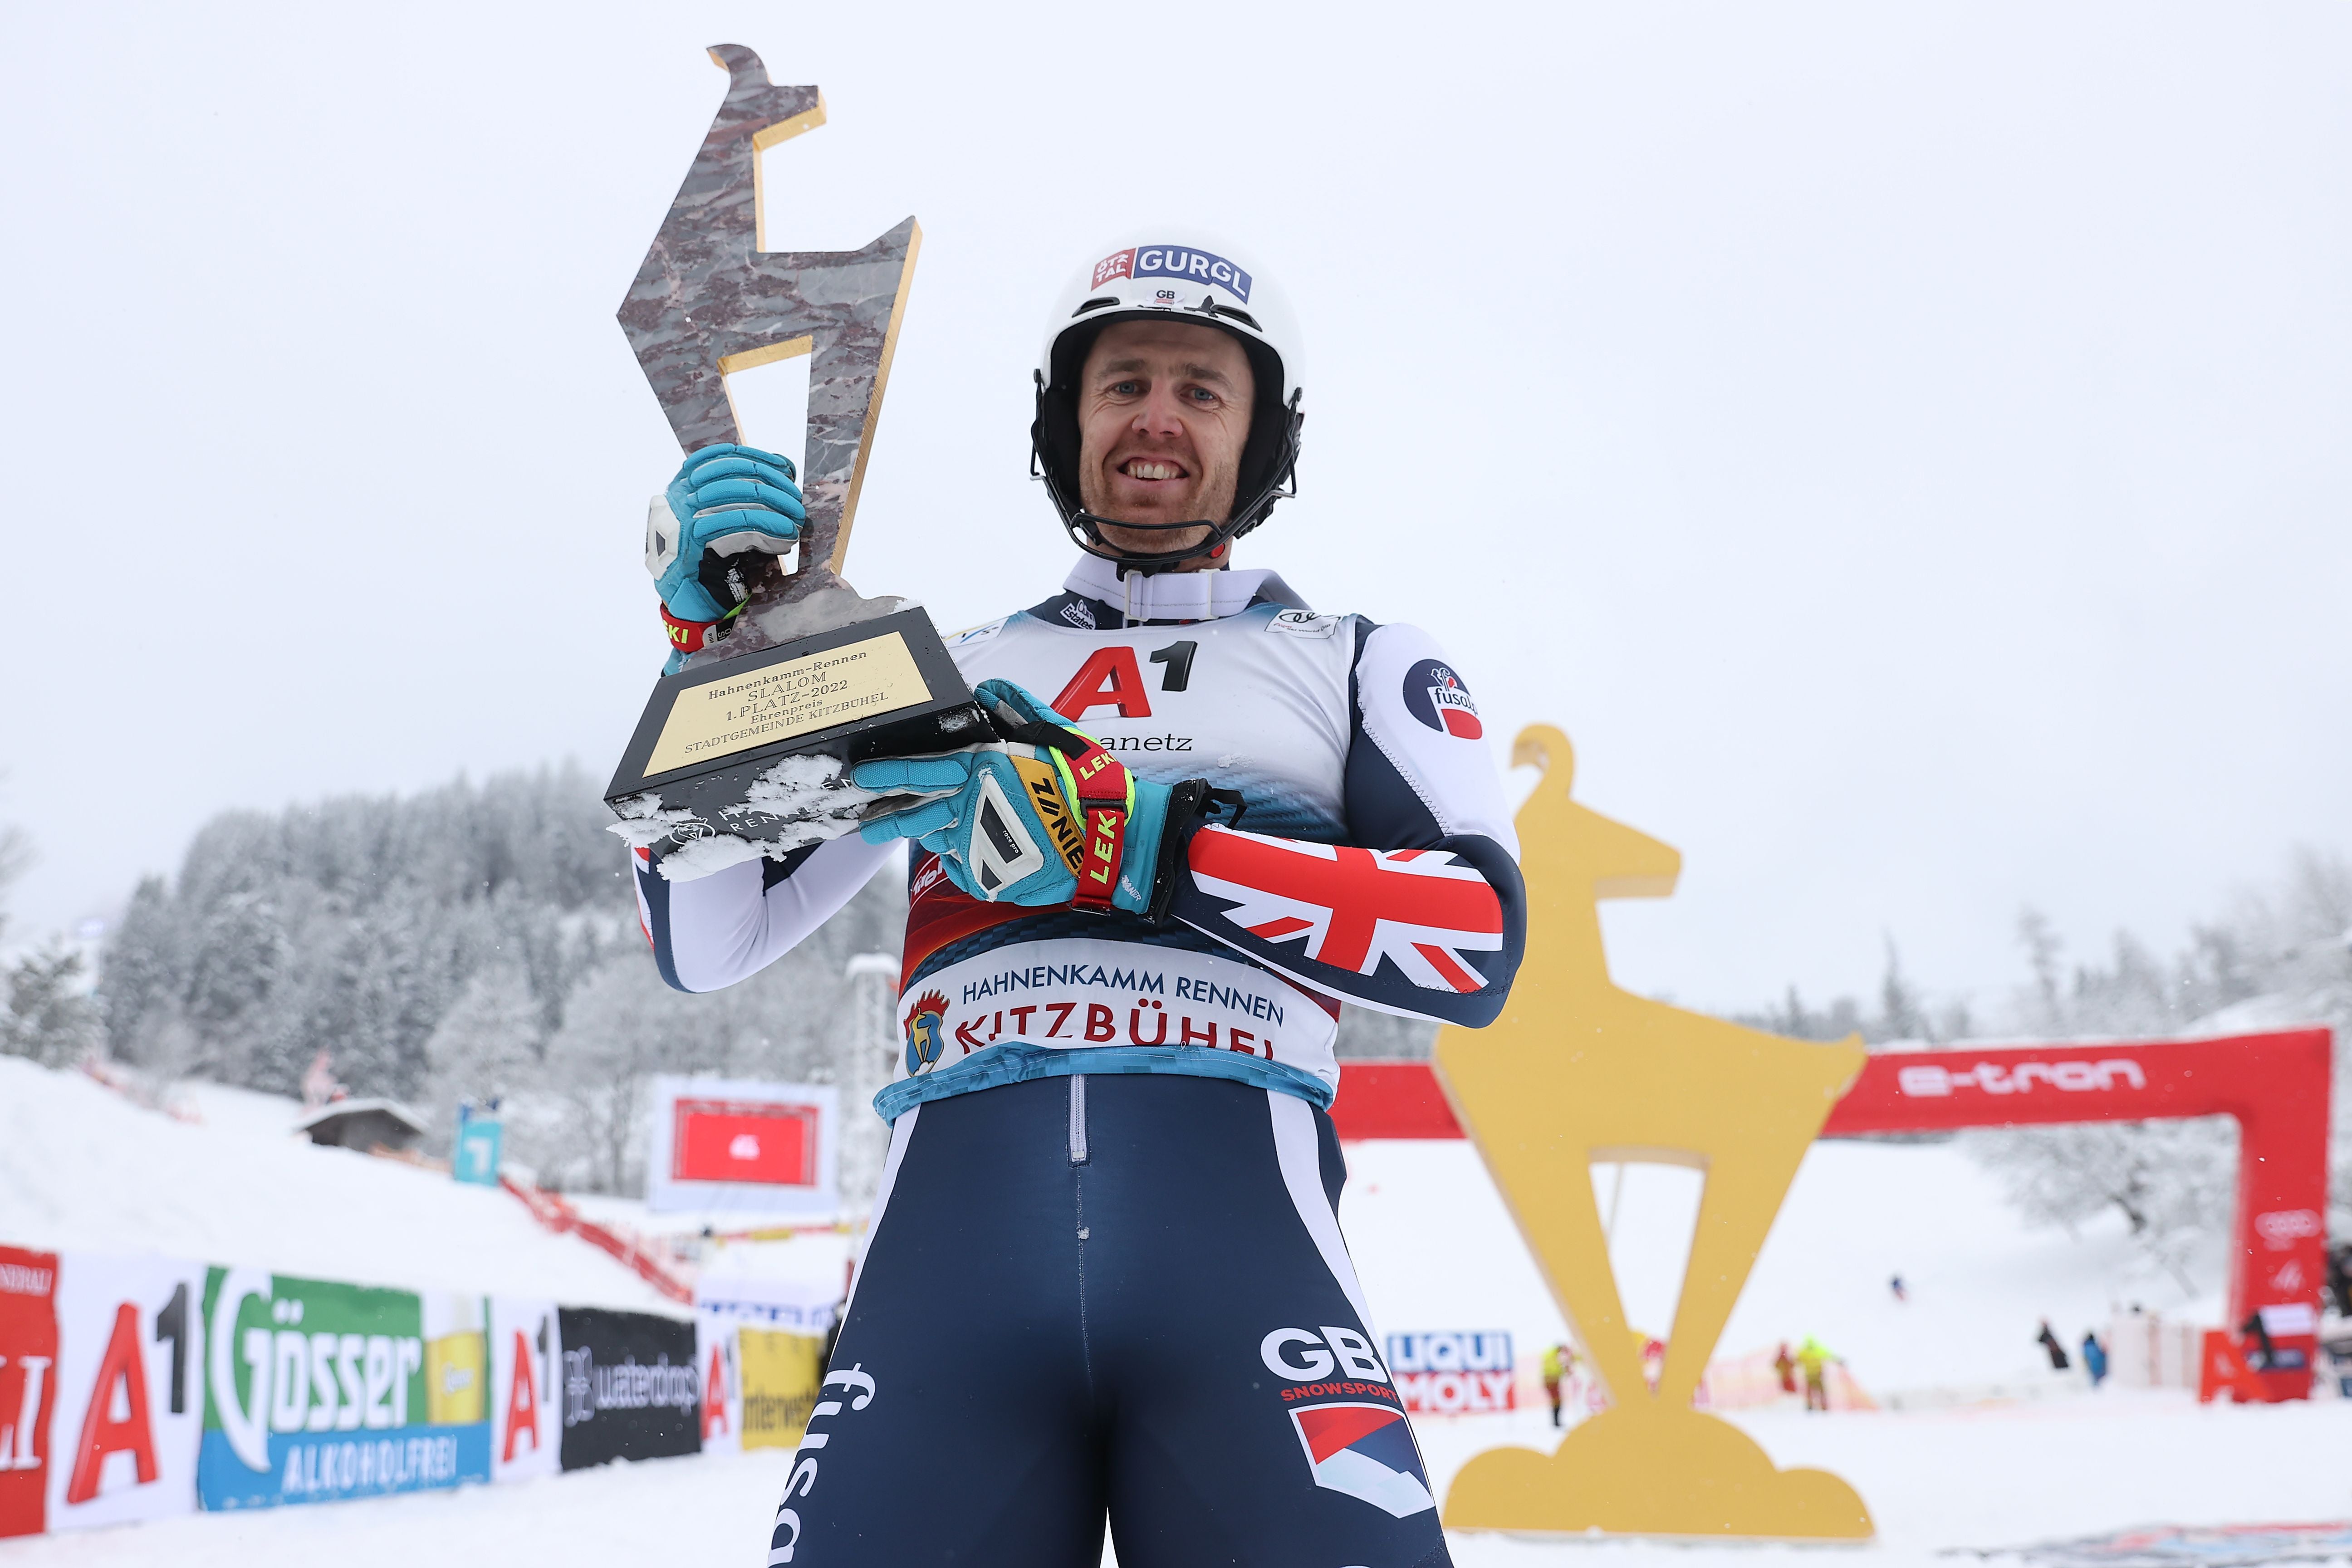 Dave Ryding wins first ever skiing World Cup gold for Great Britain ahead of Winter Olympics The Independent